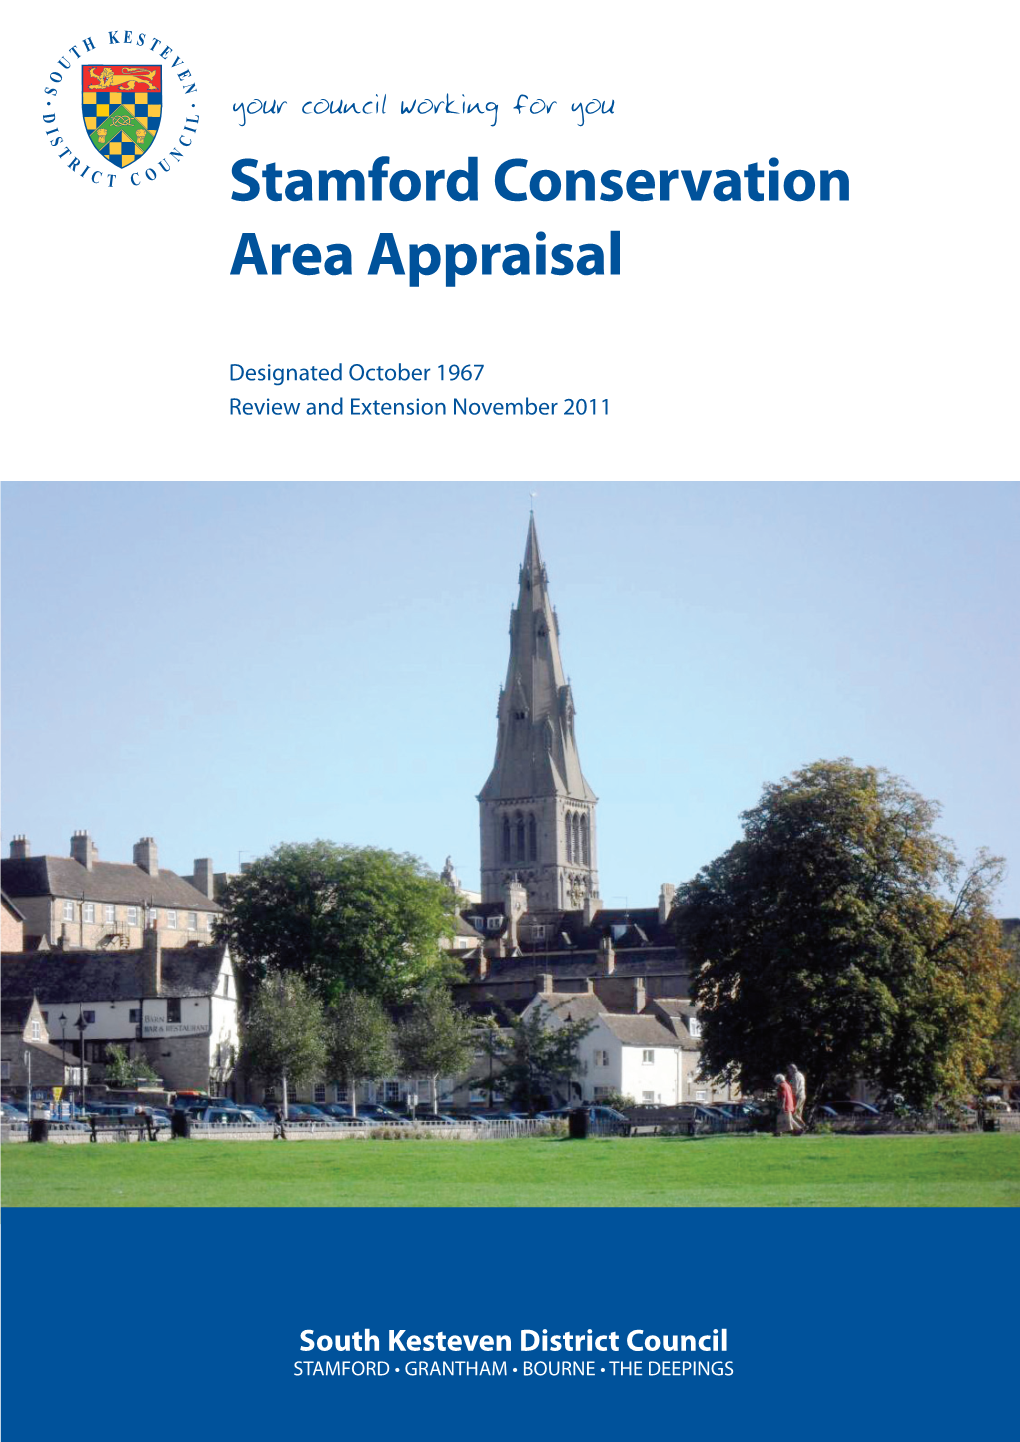 Stamford Conservation Area Appraisal